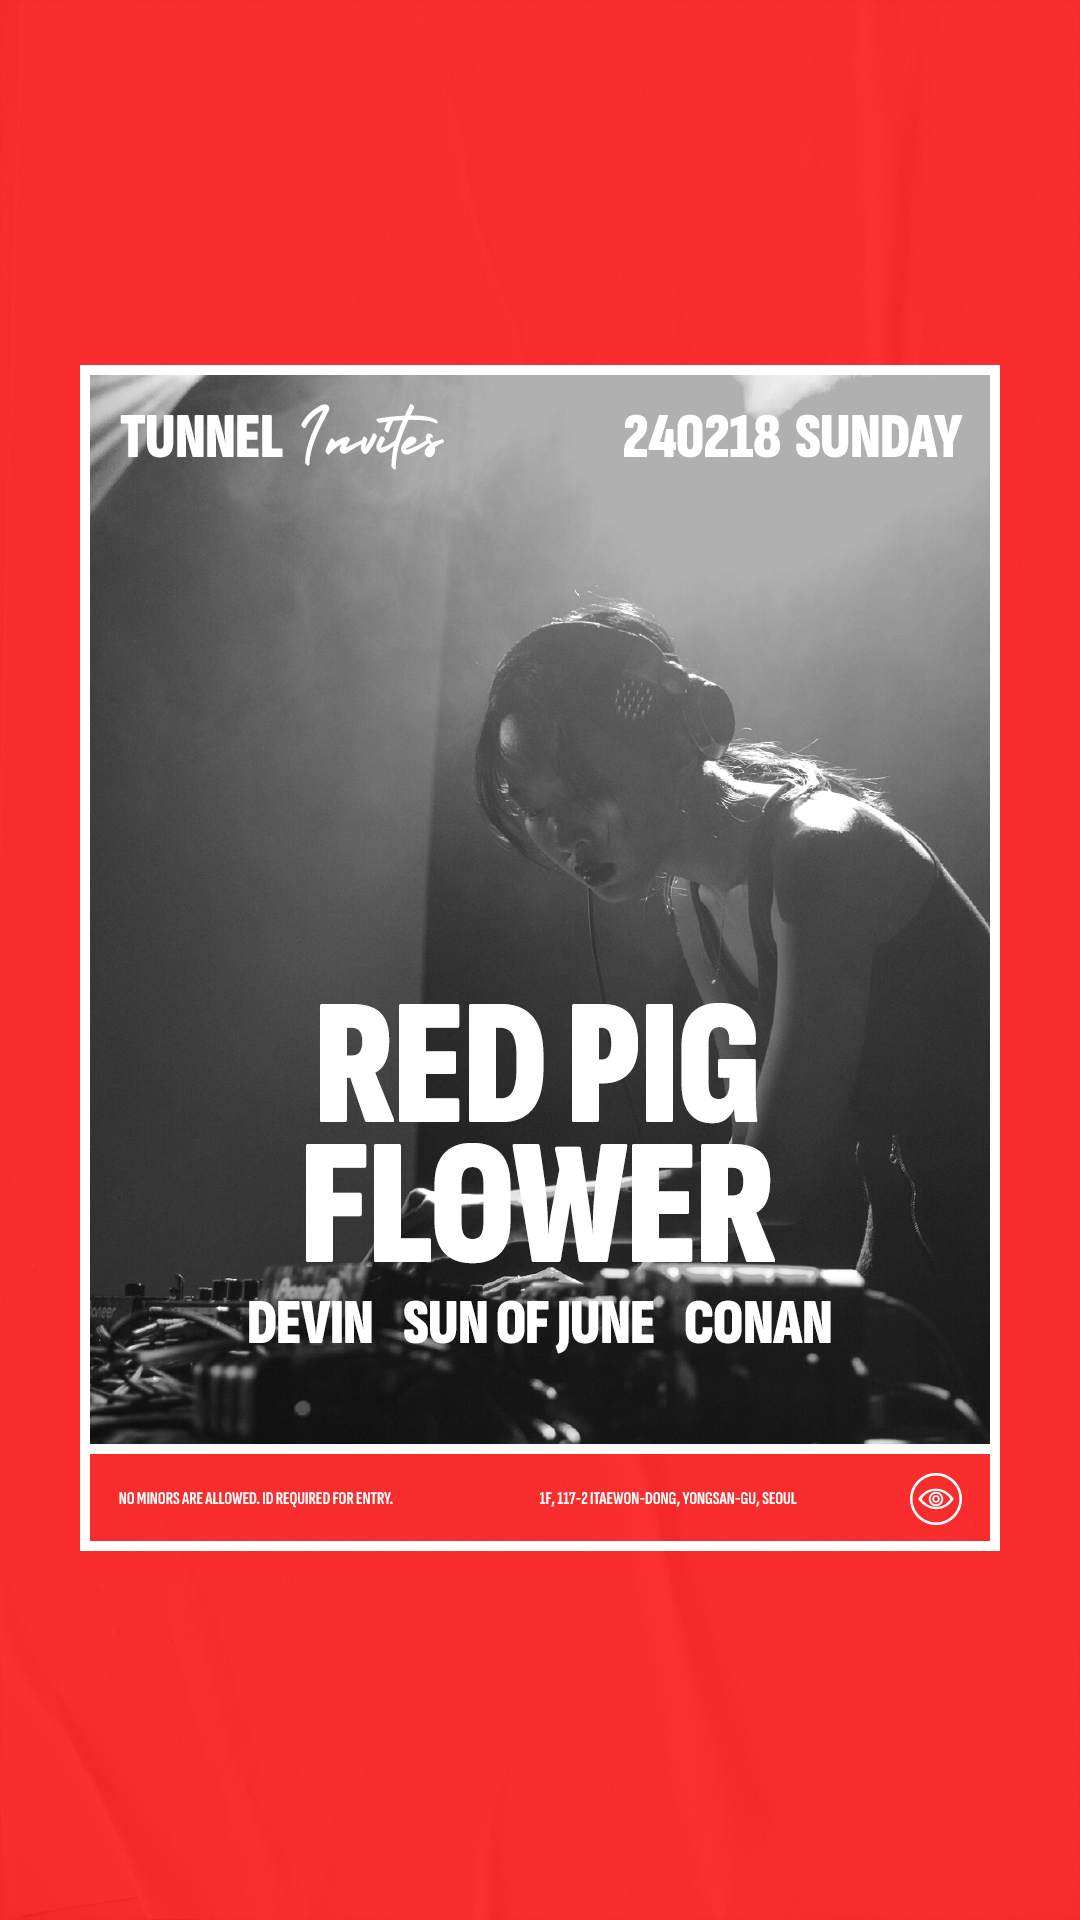 [Tunnel] Tunnel Seoul invites 'Red pig flower' - フライヤー表